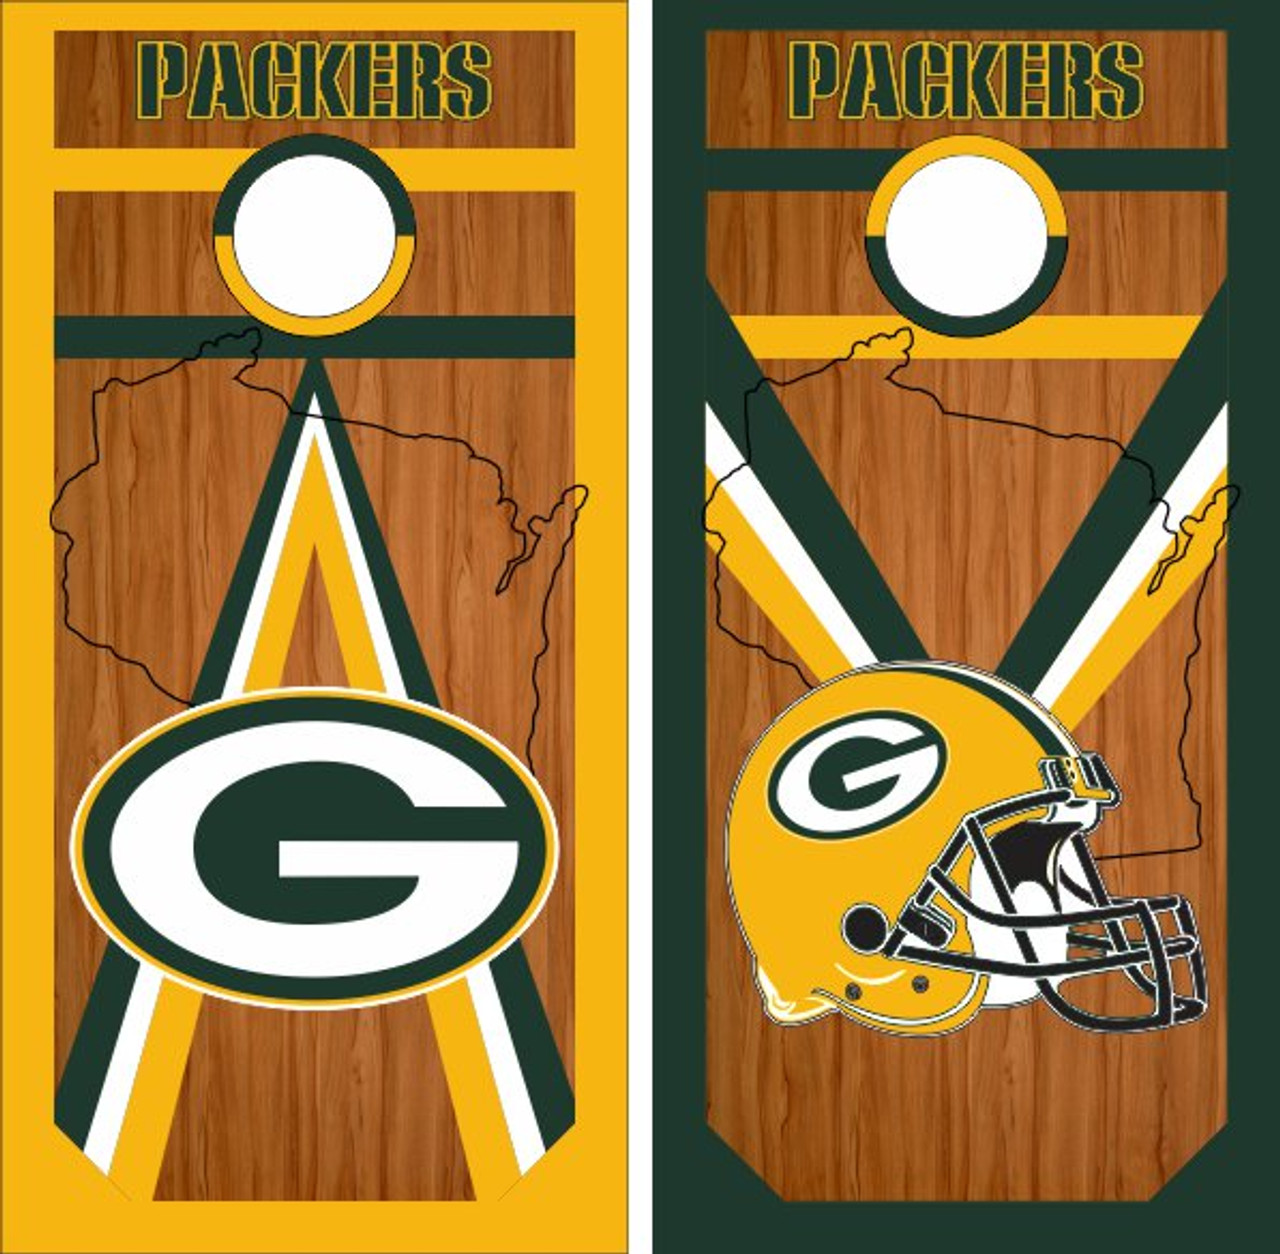 Greenbay Packers 0352 cornhole board vinyl wraps stickers posters decals skins 